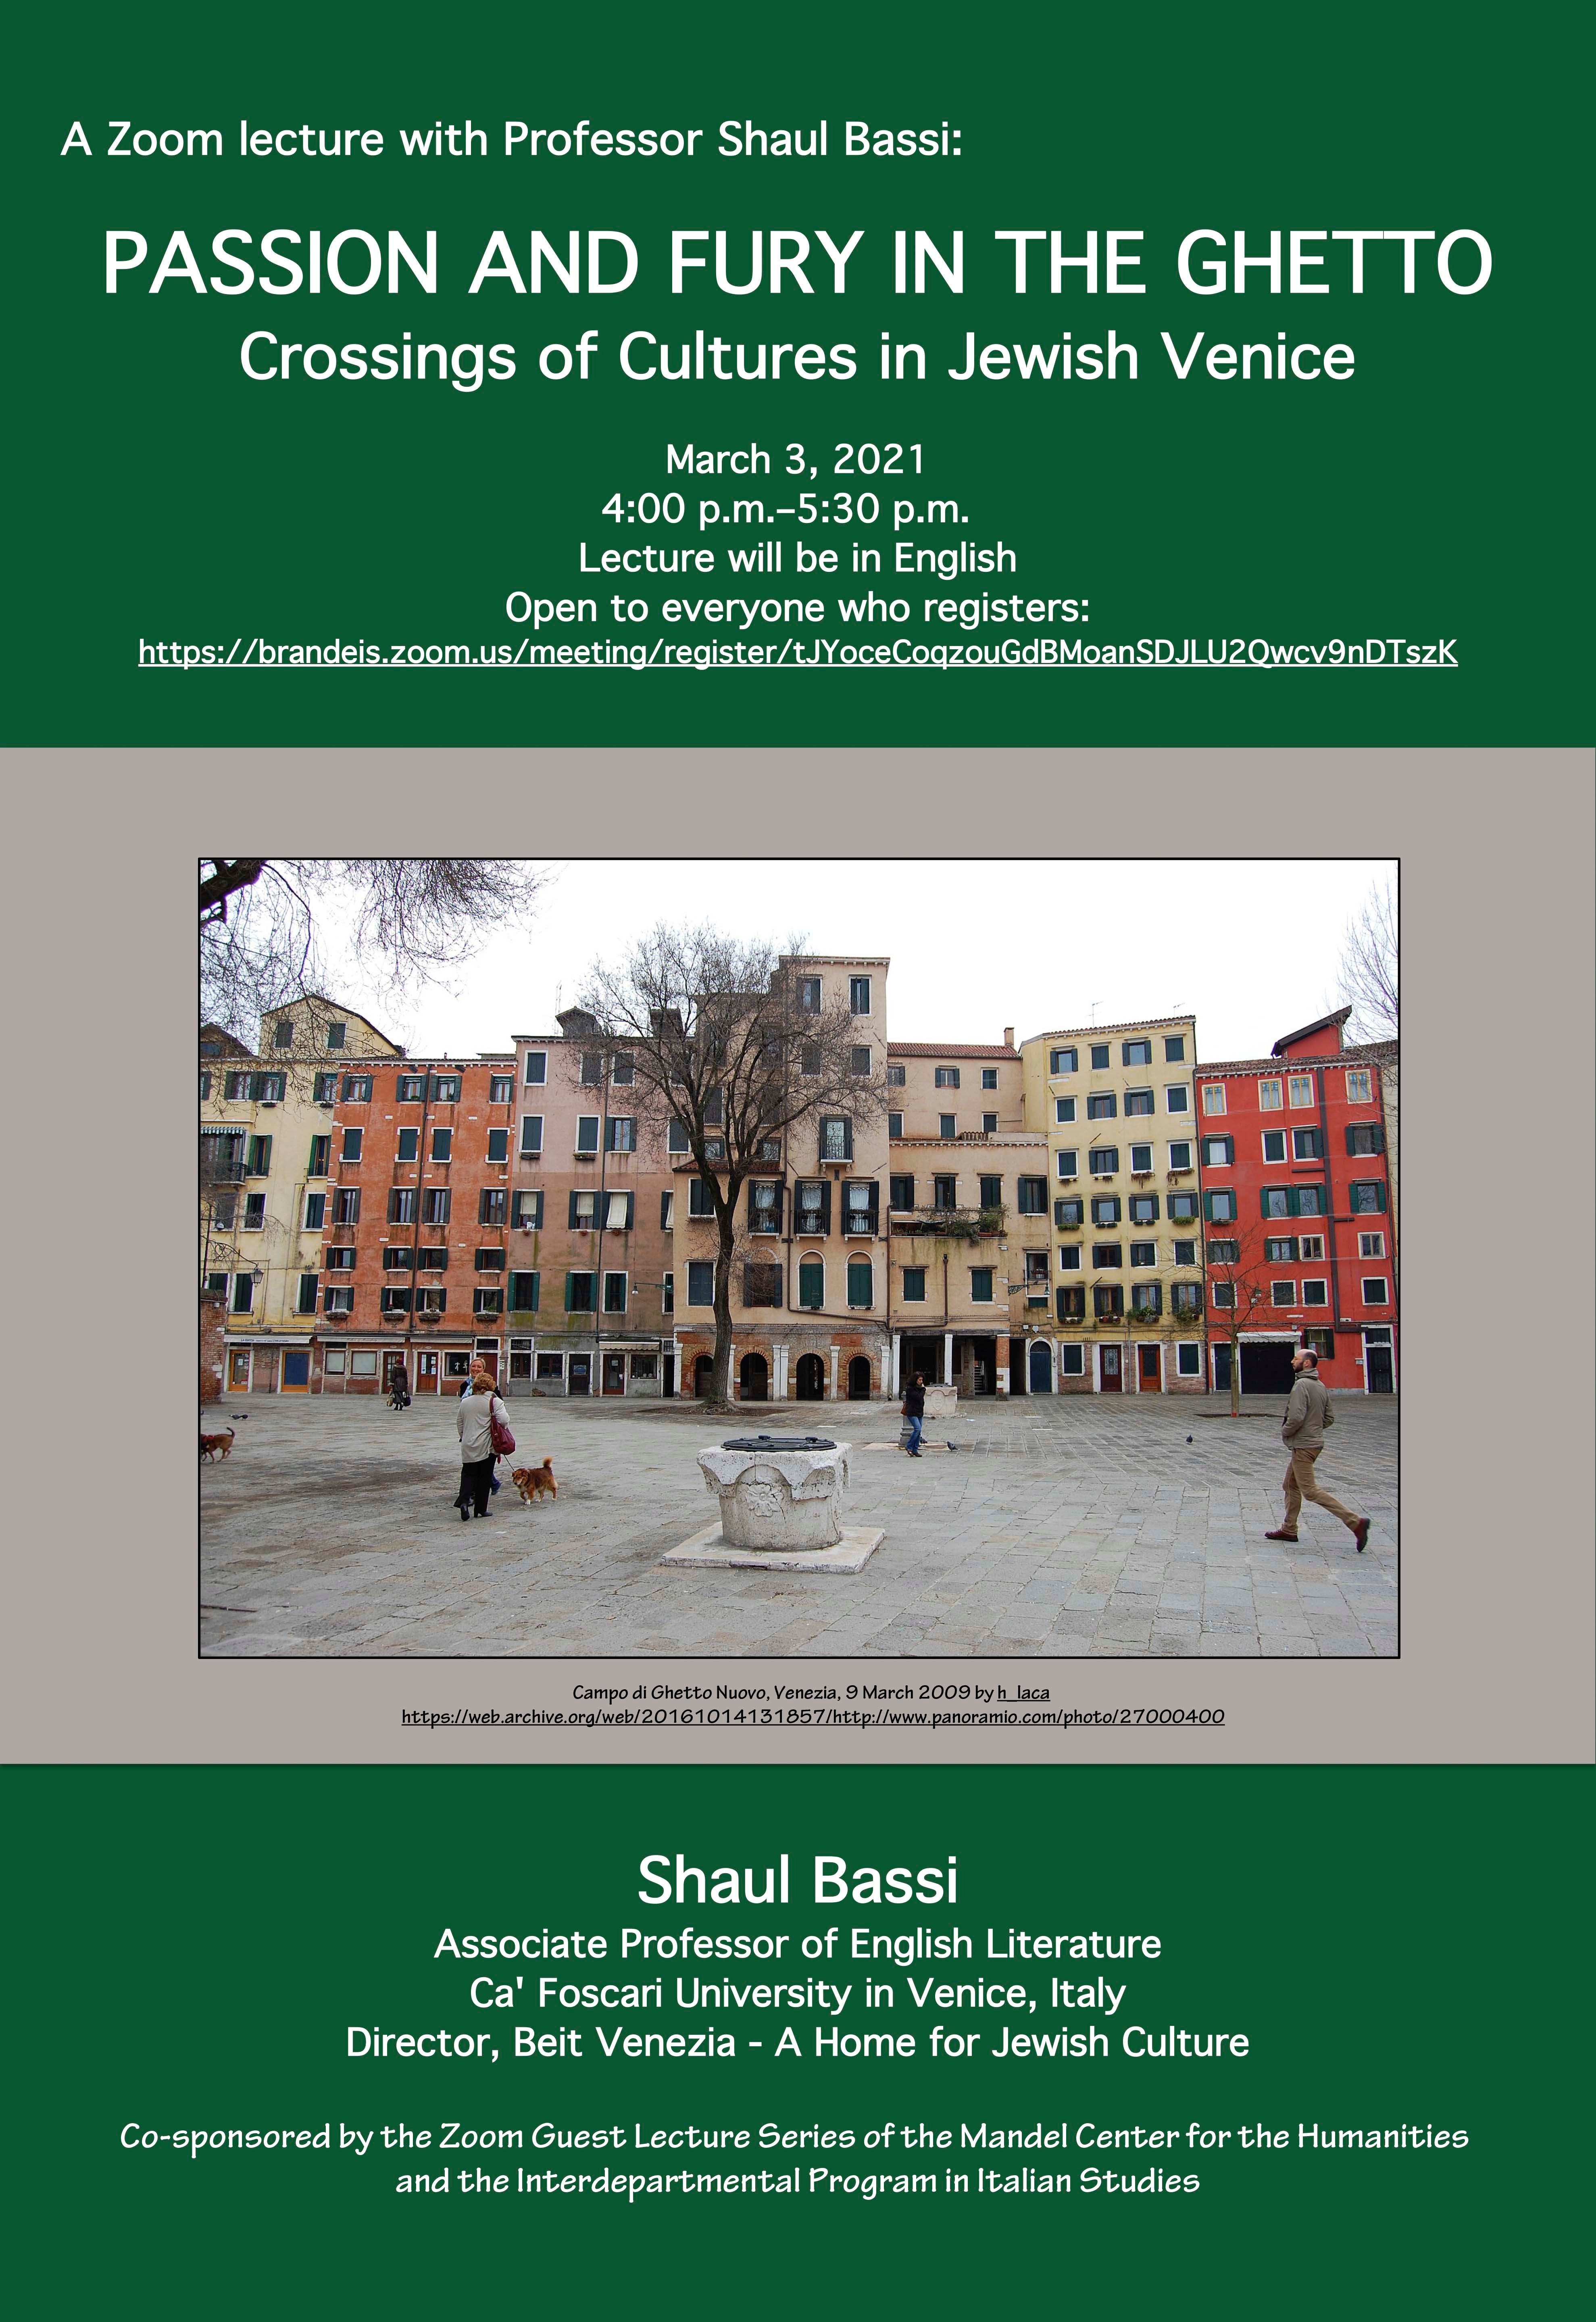 Text on a green background; in the middle is a photo of the Campo di Ghetto Nuovo, Venezia